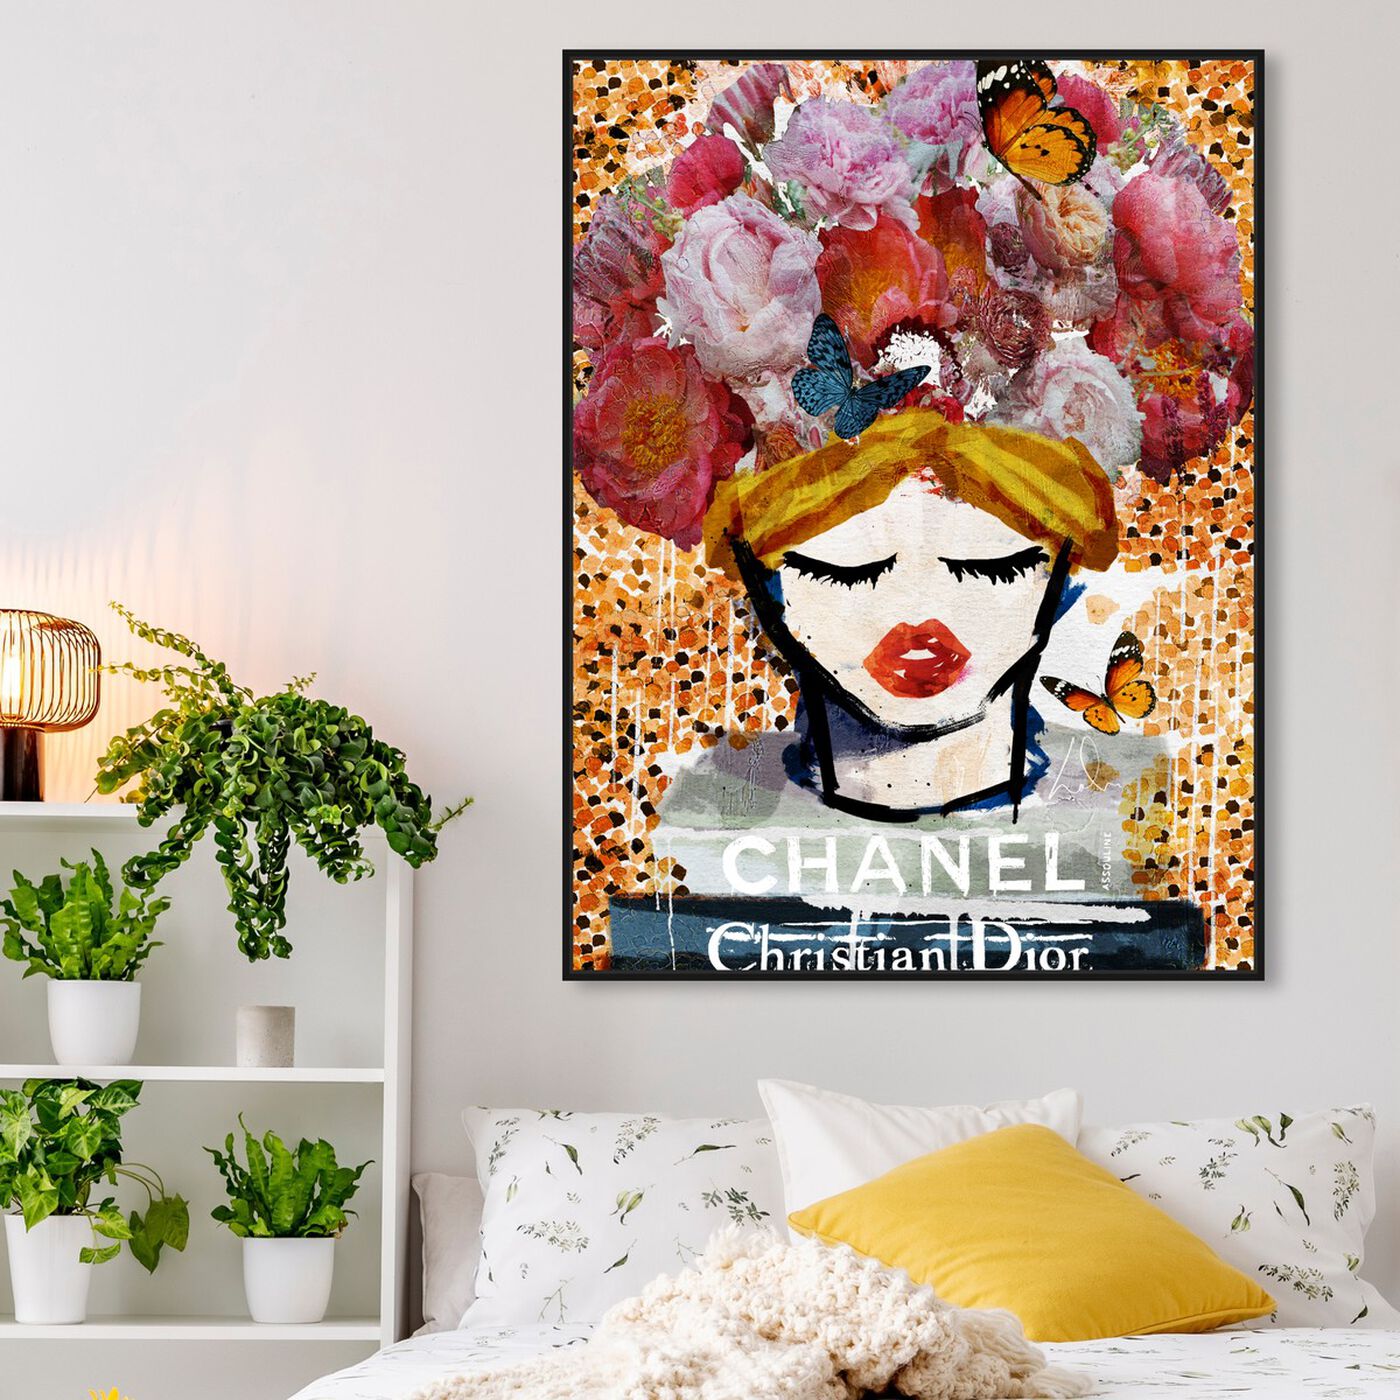 Sicilian Vase  Fashion and Glam Wall Art by Oliver Gal